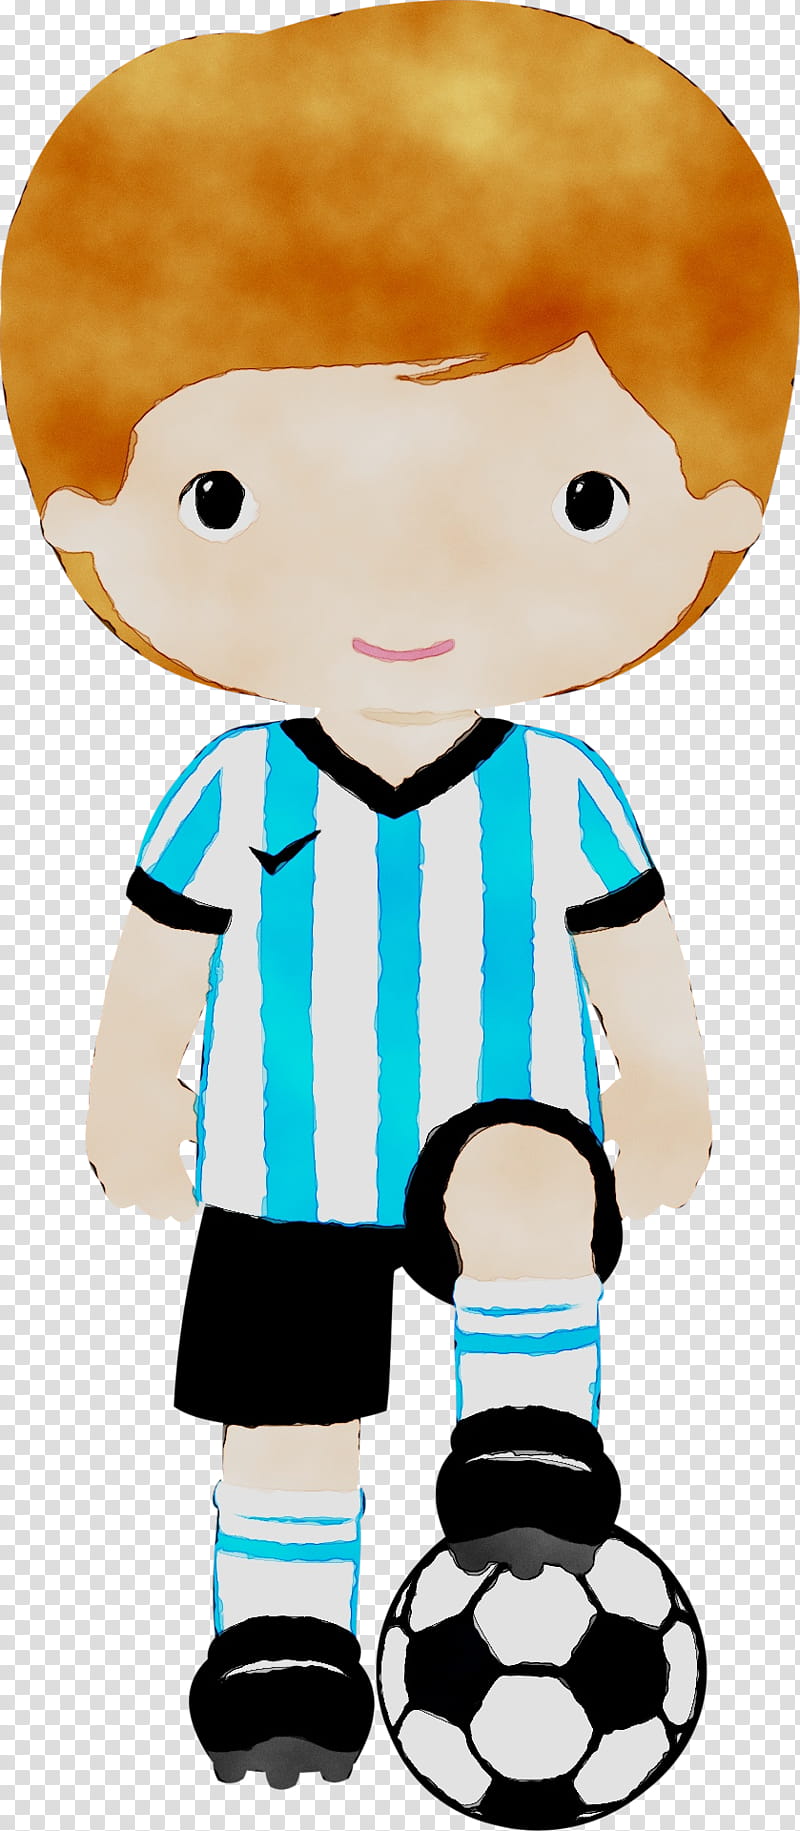 Football Pitch, Sports, Athlete, Football Player, Argentina National Football Team, Drawing, Cristiano Ronaldo, Cartoon transparent background PNG clipart